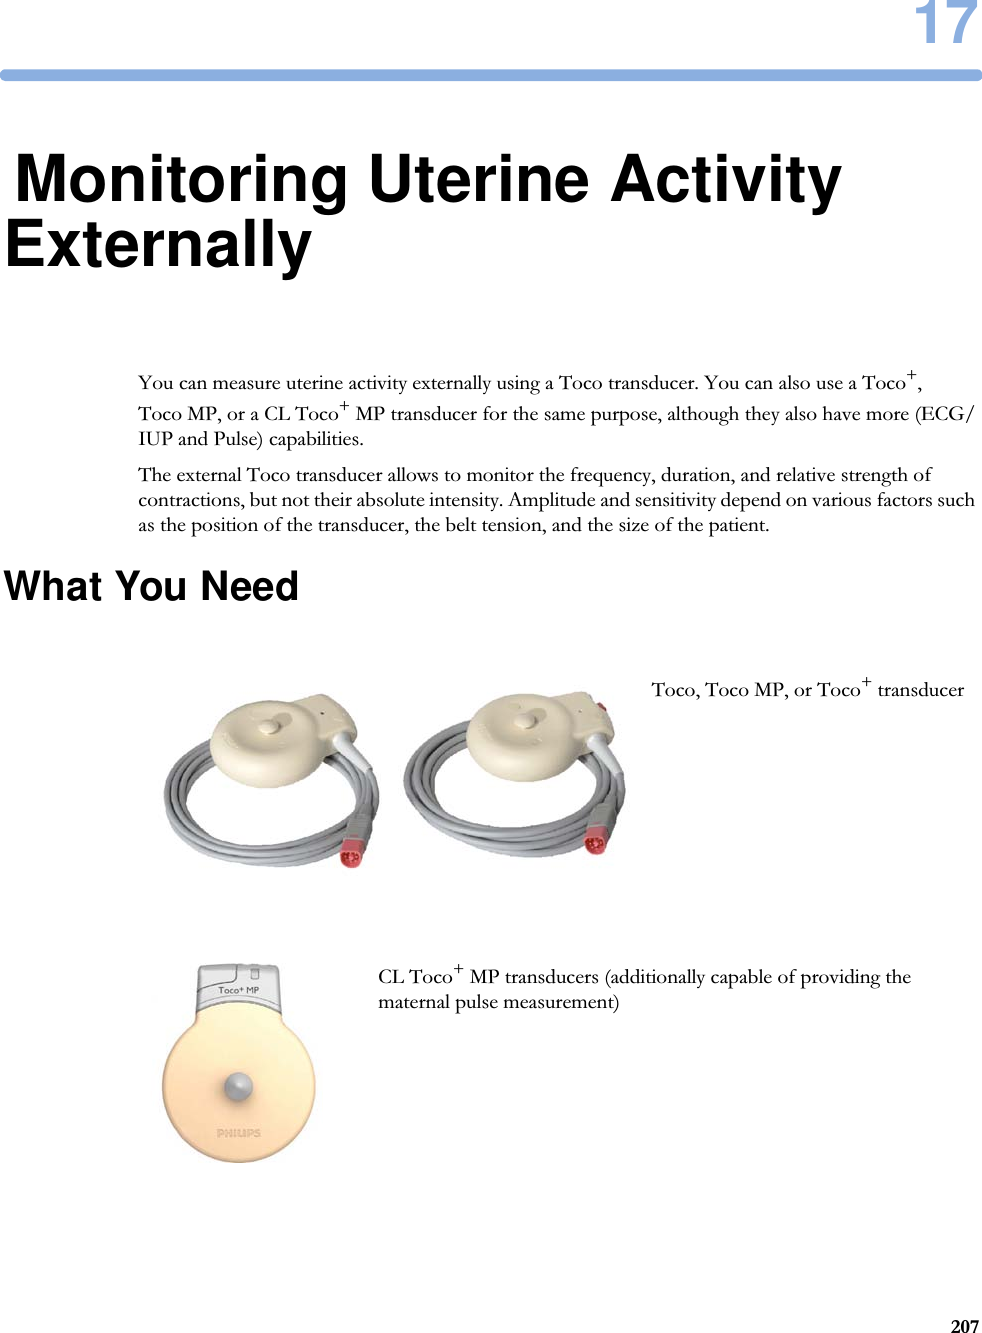 1720717Monitoring Uterine Activity ExternallyYou can measure uterine activity externally using a Toco transducer. You can also use a Toco+, Toco MP, or a CL Toco+ MP transducer for the same purpose, although they also have more (ECG/IUP and Pulse) capabilities.The external Toco transducer allows to monitor the frequency, duration, and relative strength of contractions, but not their absolute intensity. Amplitude and sensitivity depend on various factors such as the position of the transducer, the belt tension, and the size of the patient.What You NeedToco, Toco MP, or Toco+ transducerCL Toco+ MP transducers (additionally capable of providing the maternal pulse measurement)